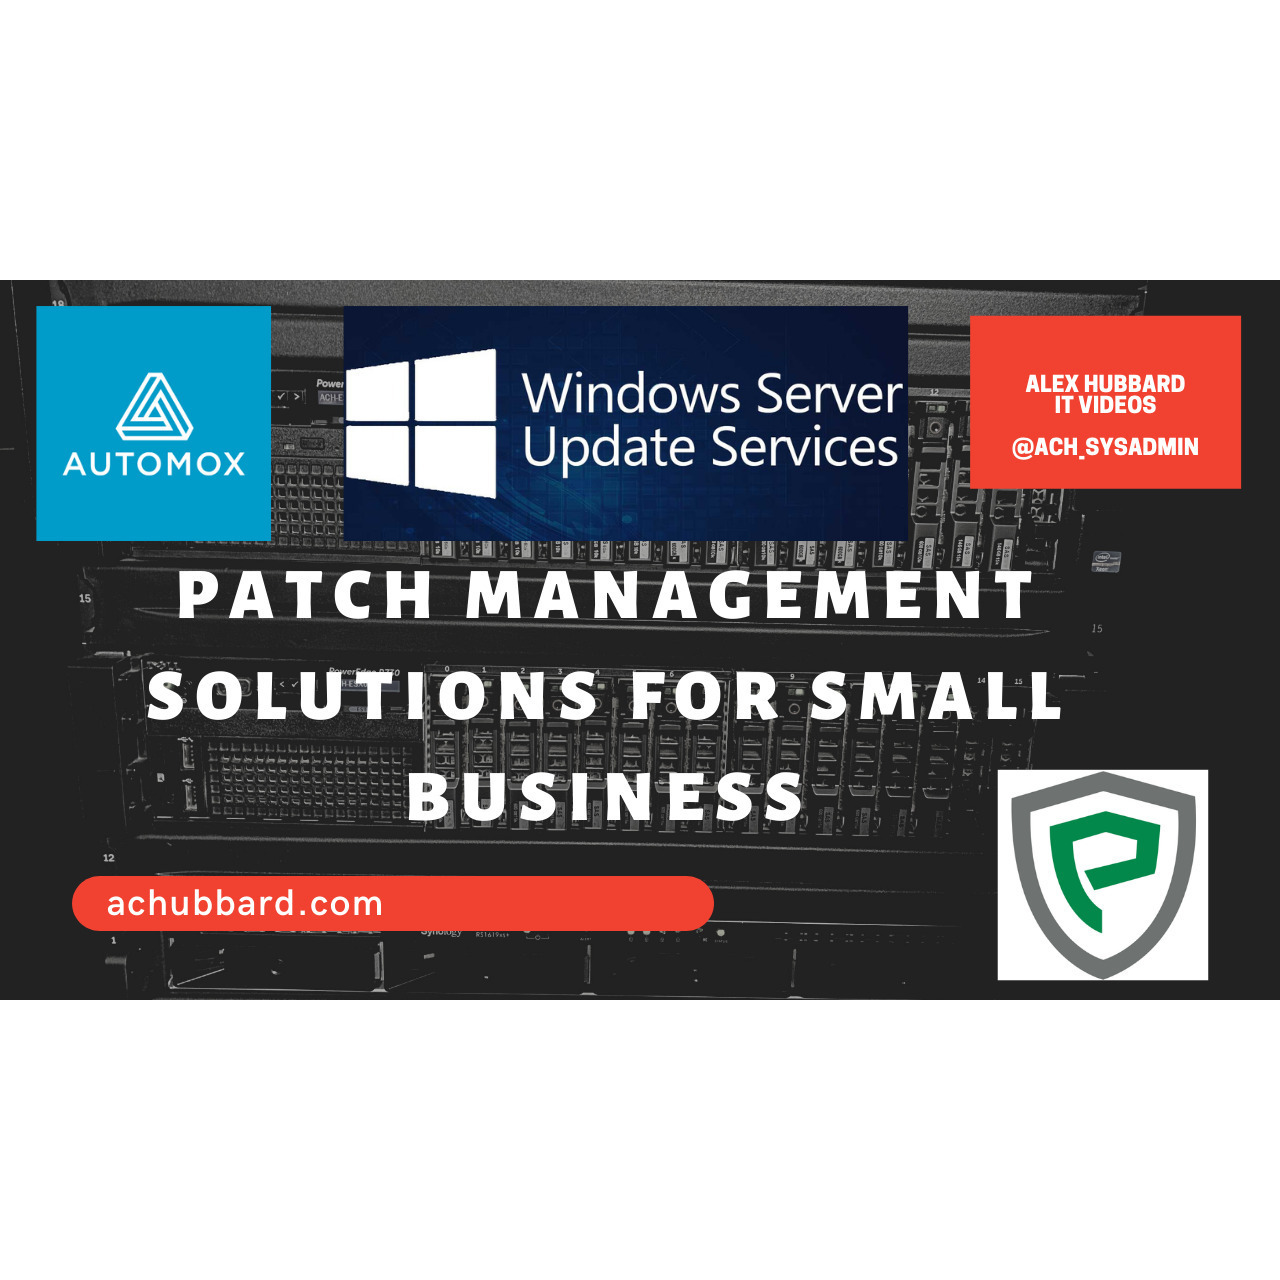 Today we are going to discuss patching. Patching is very important in today's ever changing threat landscape.
 #automox #Homelab #manageengine #patchmanagerplus #patching #patchinglinux #patchingmacos #patchingsolutions #patchingwindows #server #sysadmin #Windows

https://www.youtube.com/watch?v=OHCvyAOJhsE